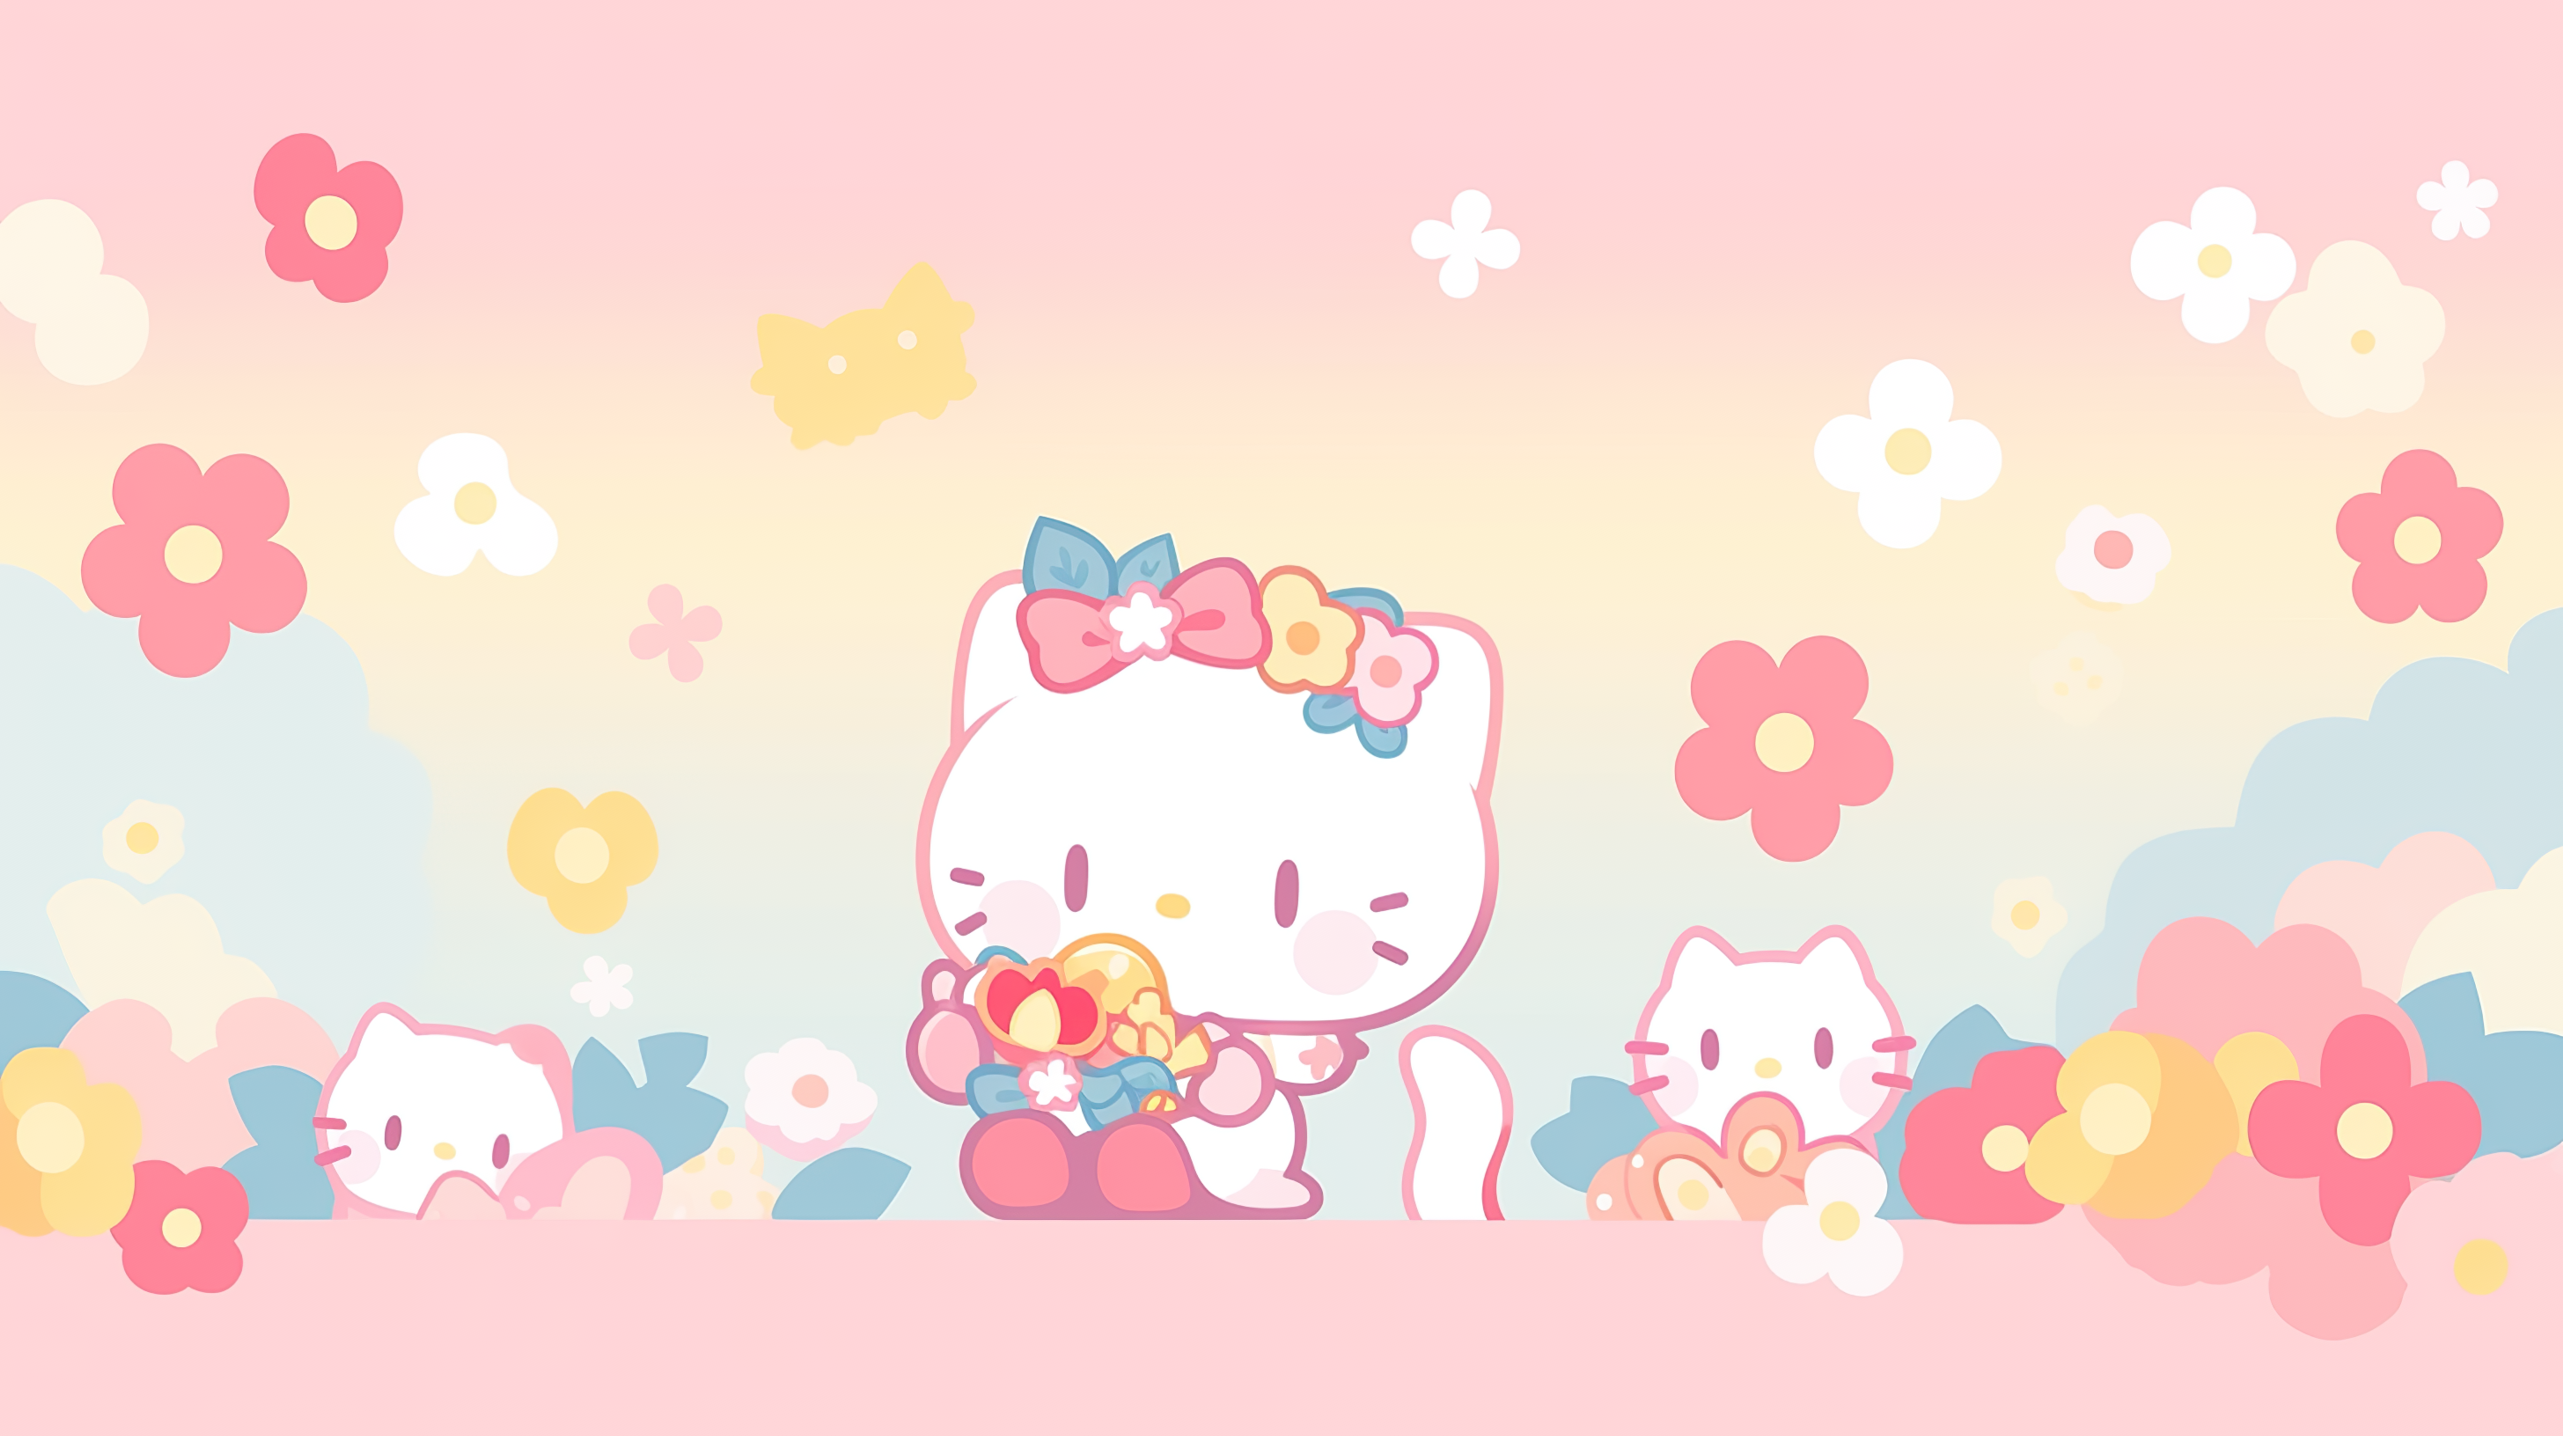 HD Hello Kitty desktop wallpaper featuring cute character designs with a pastel floral background.